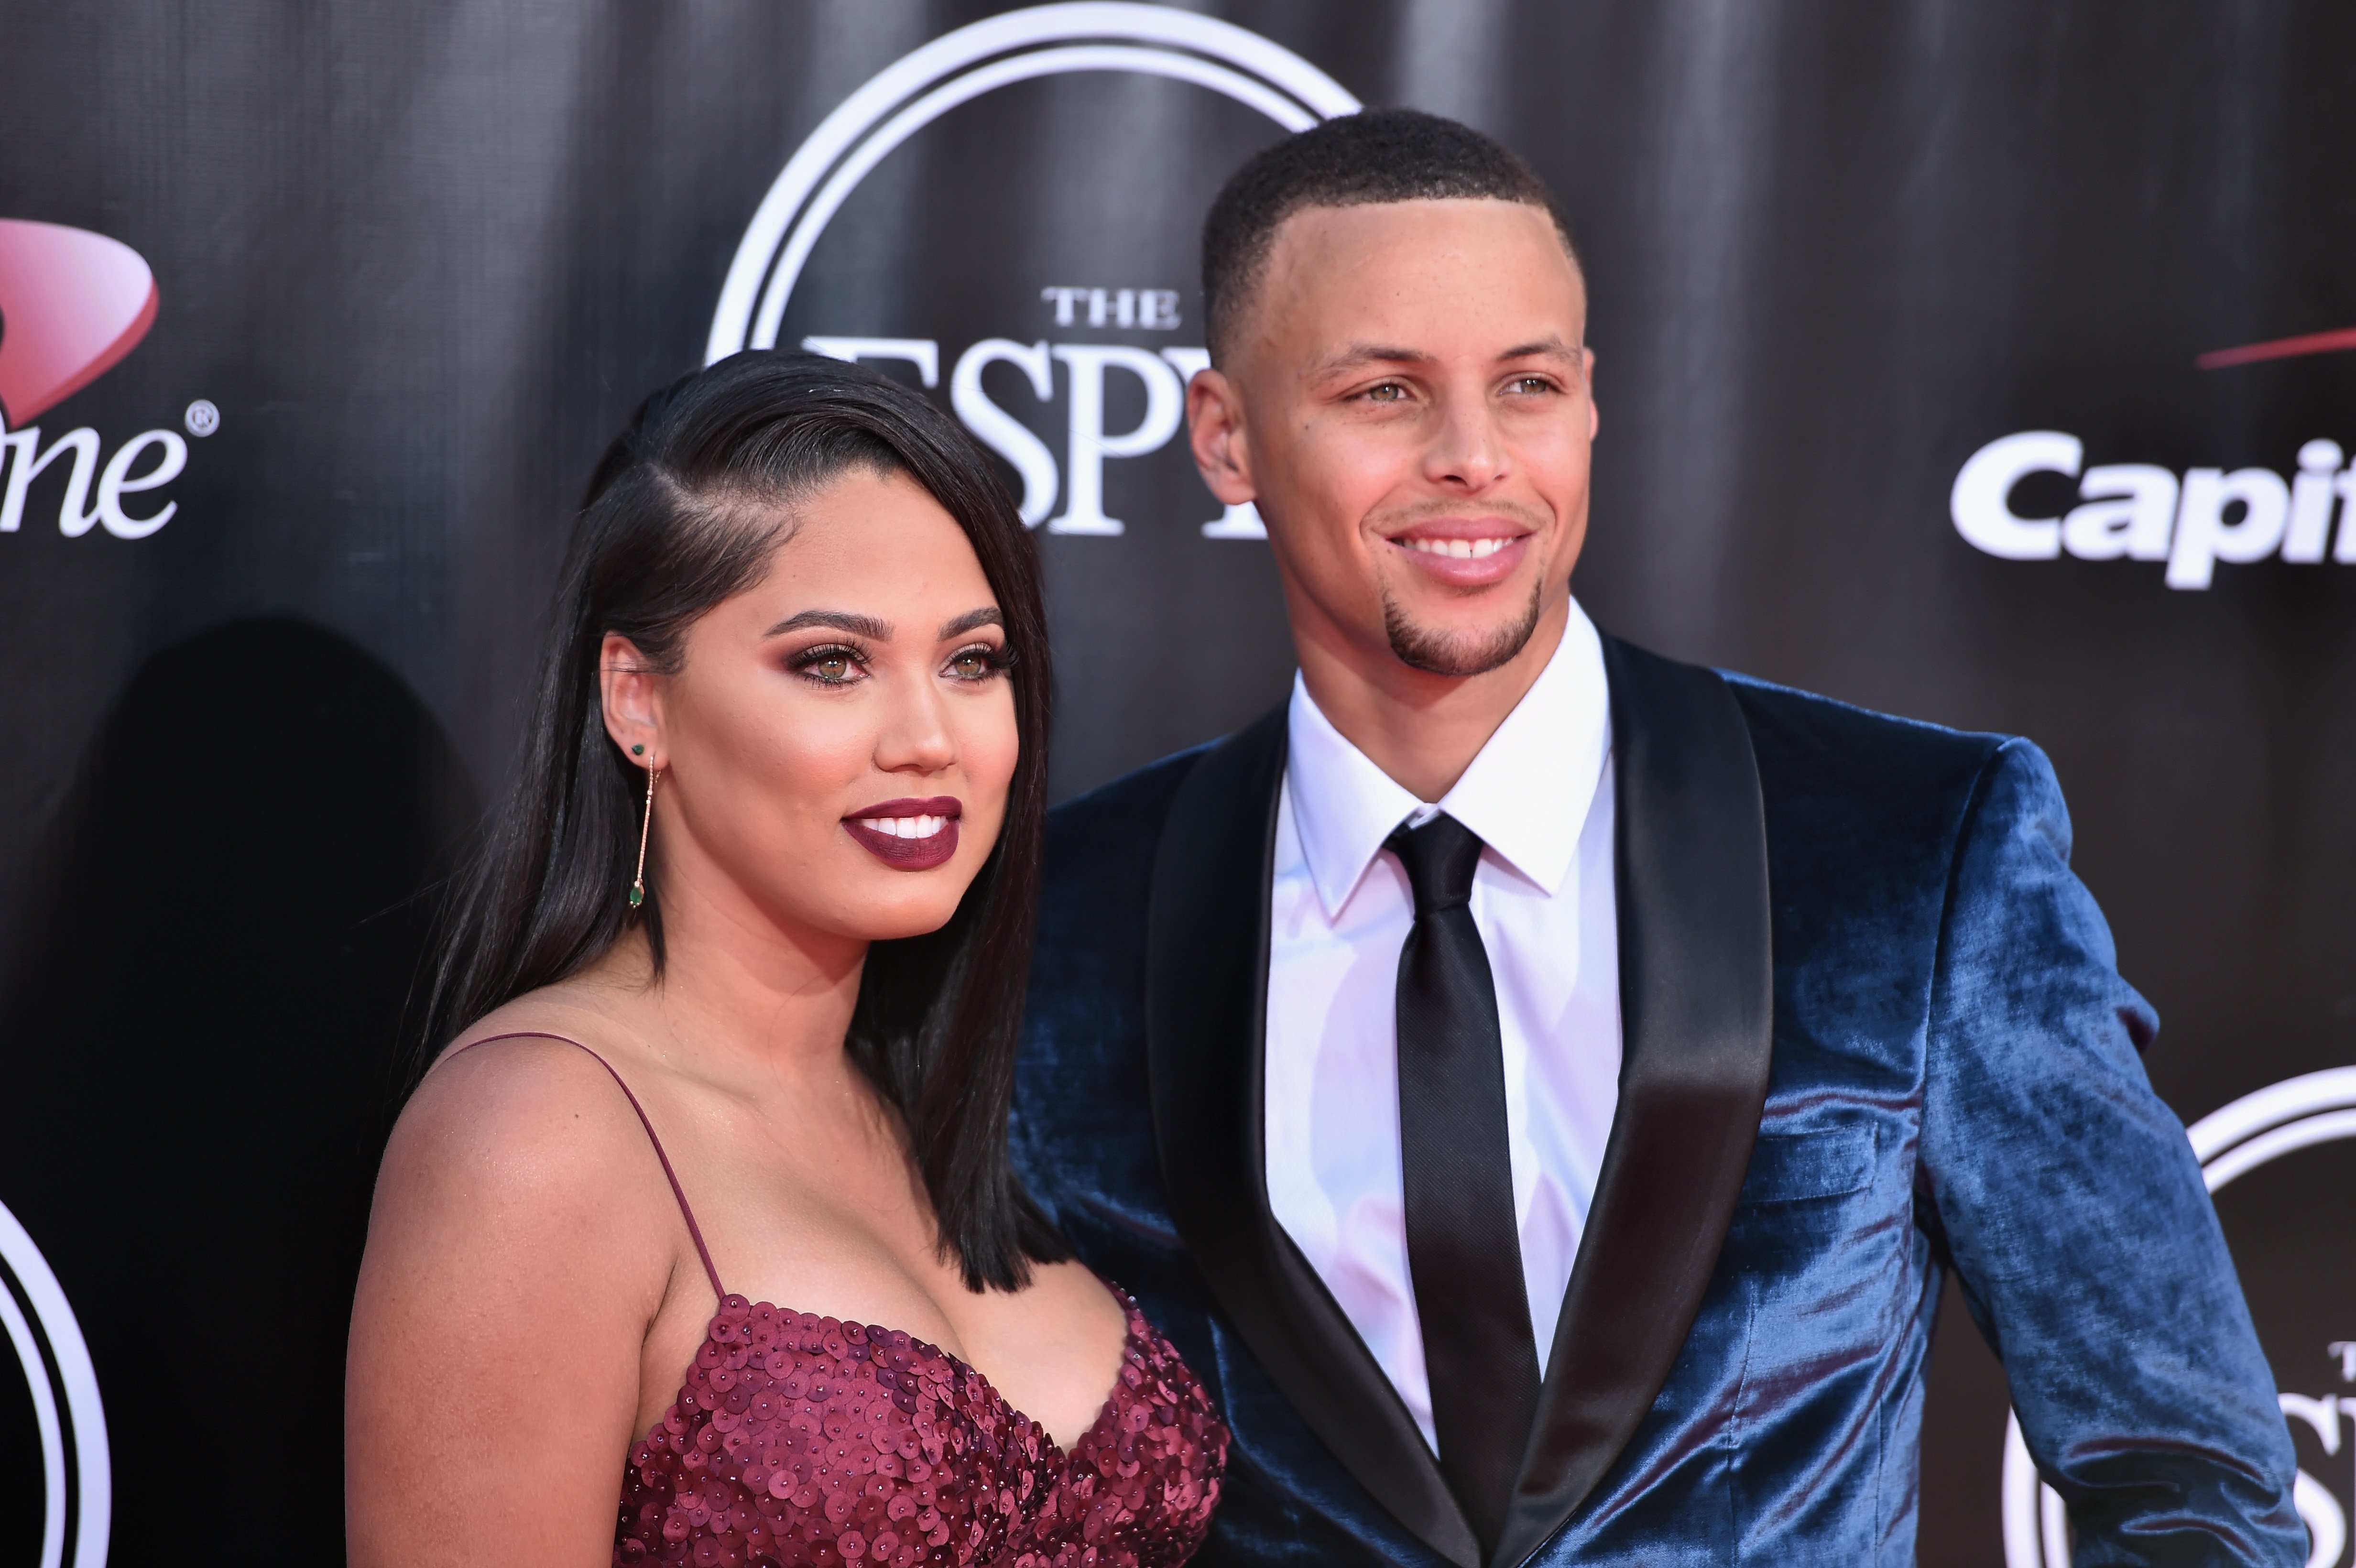 Stephen Curry (R) and Ayesha Curry attend the 2016 ESPYS at Microsoft Theater on July 13, 2016 | Photo: GettyImages